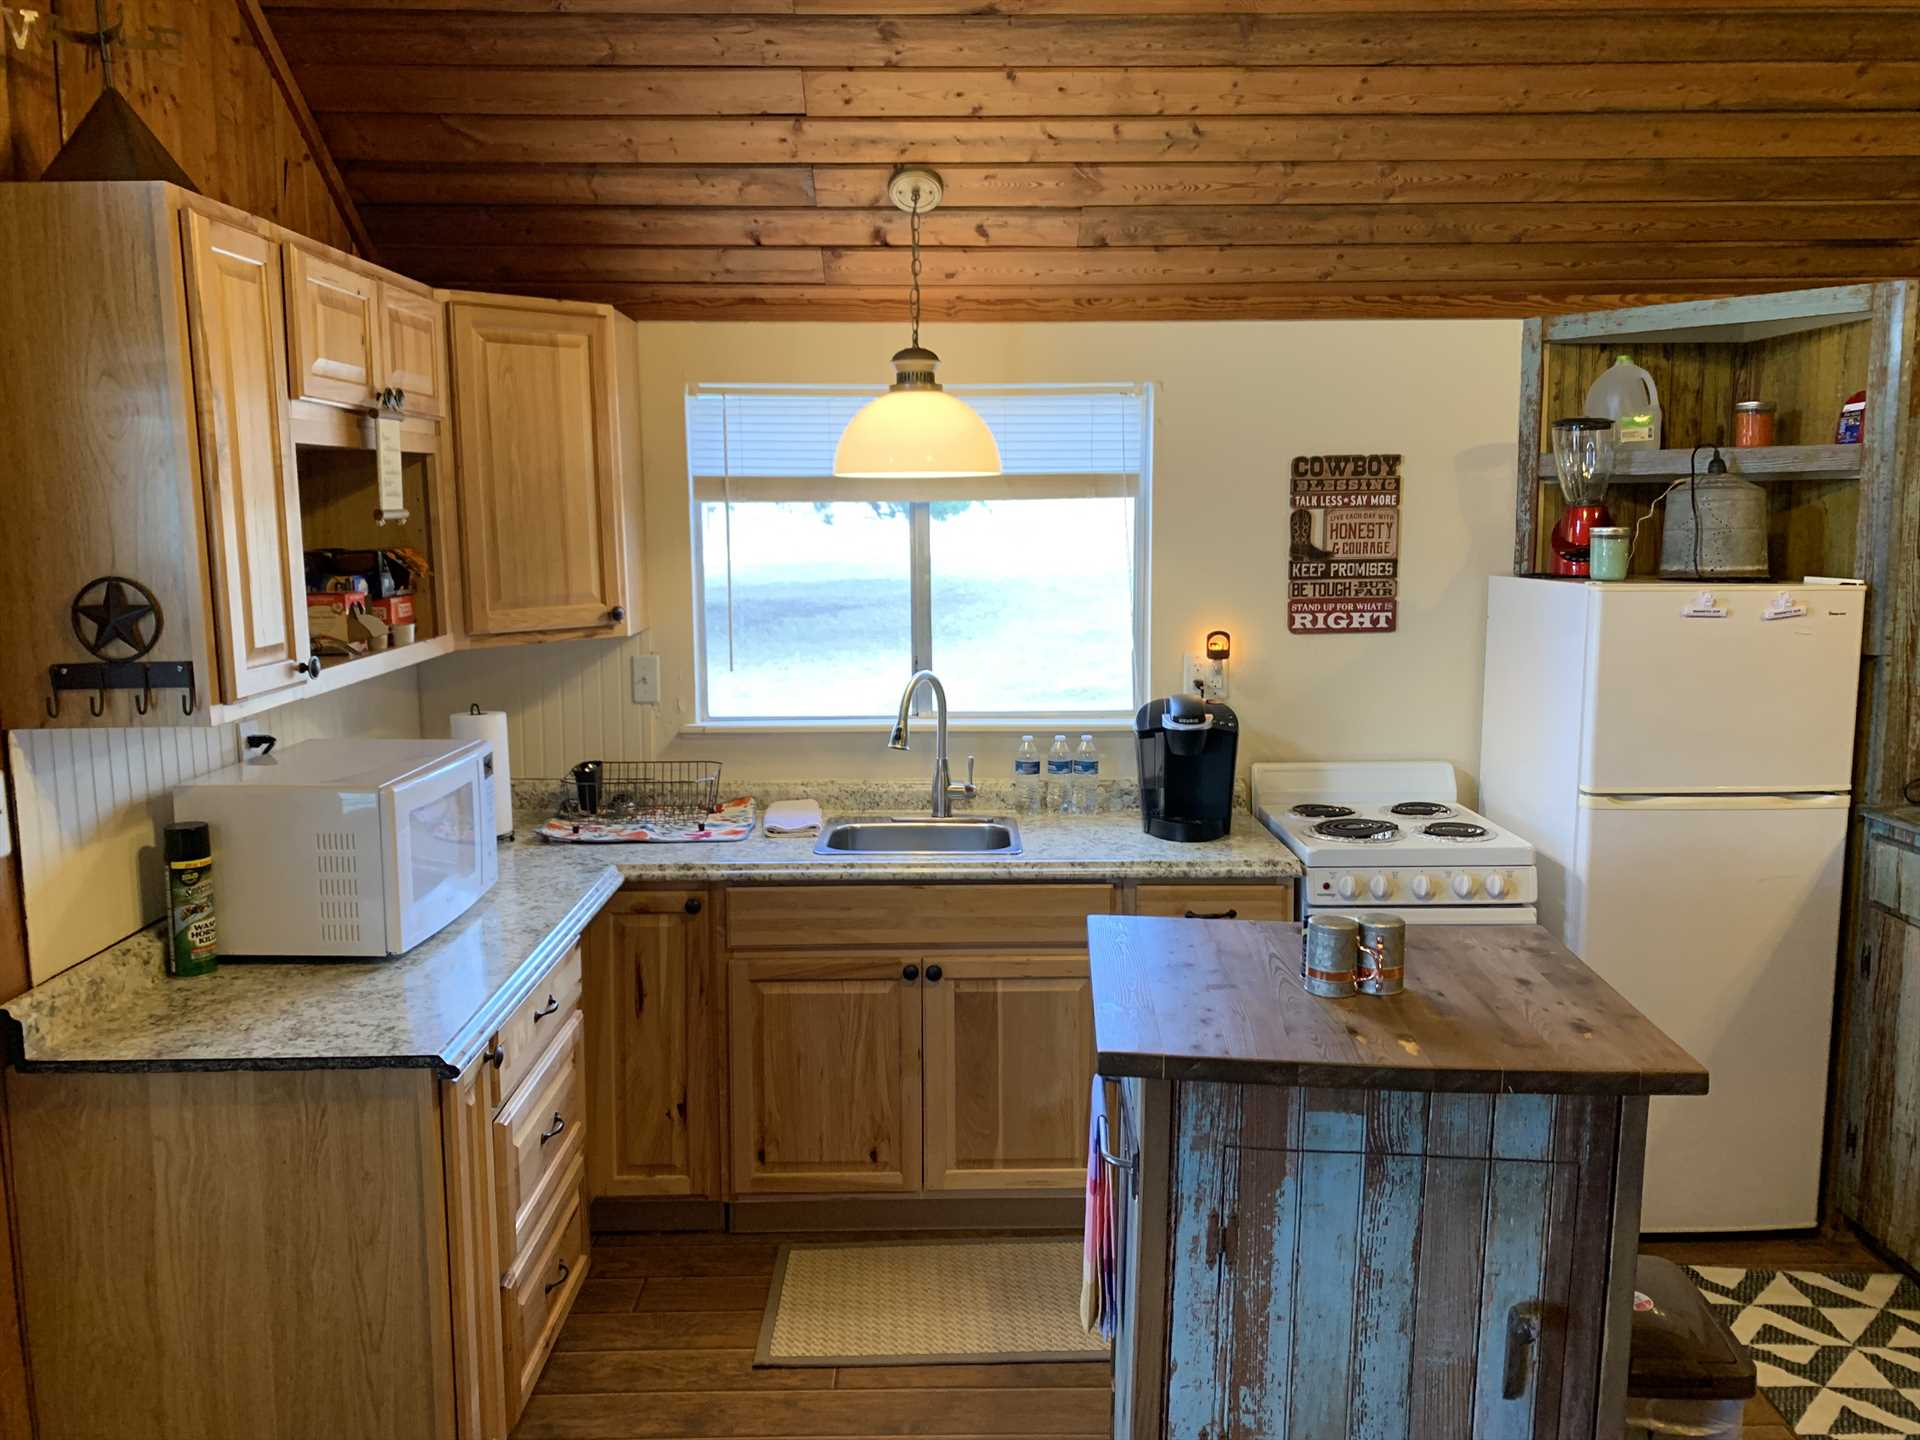                                                 The handsomely-detailed Pony Cabin kitchen includes plenty of counter space and a food prep island.